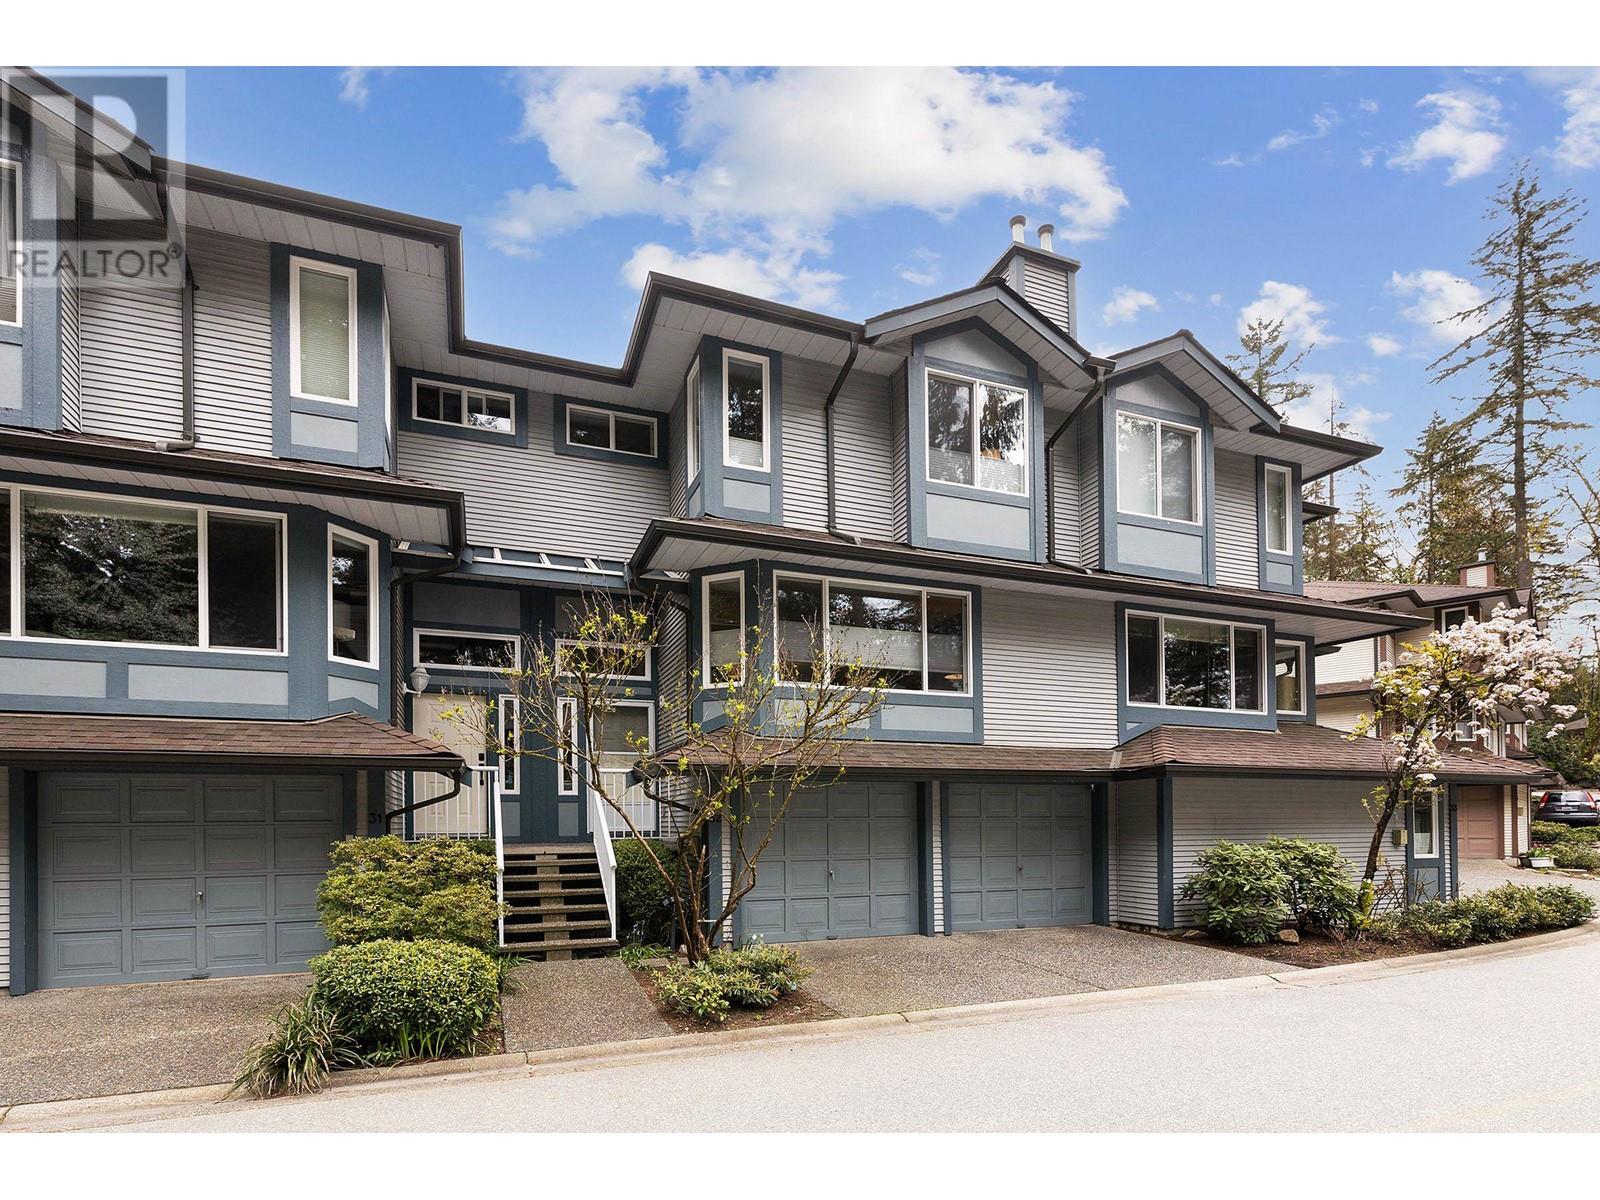 32 103 PARKSIDE DRIVE, port moody, British Columbia